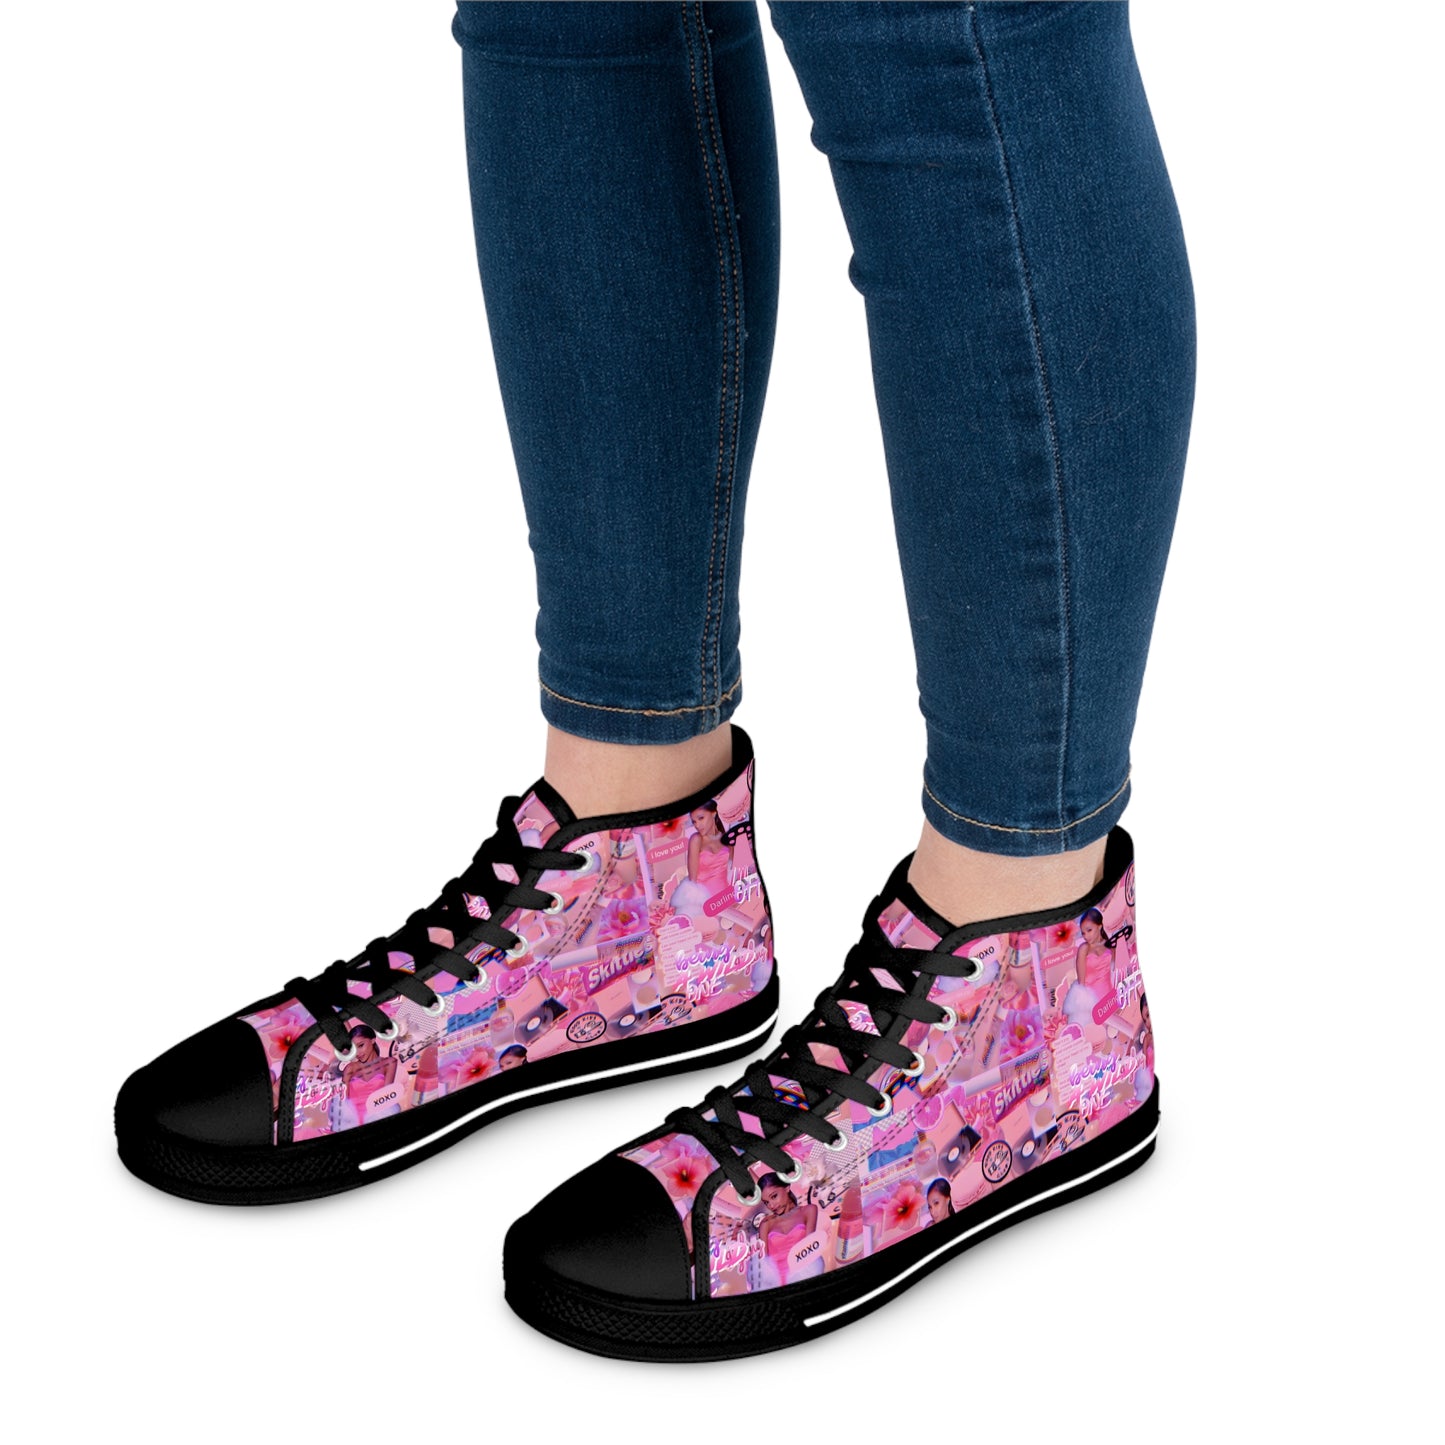 Ariana Grande Purple Vibes Collage Women's High Top Sneakers